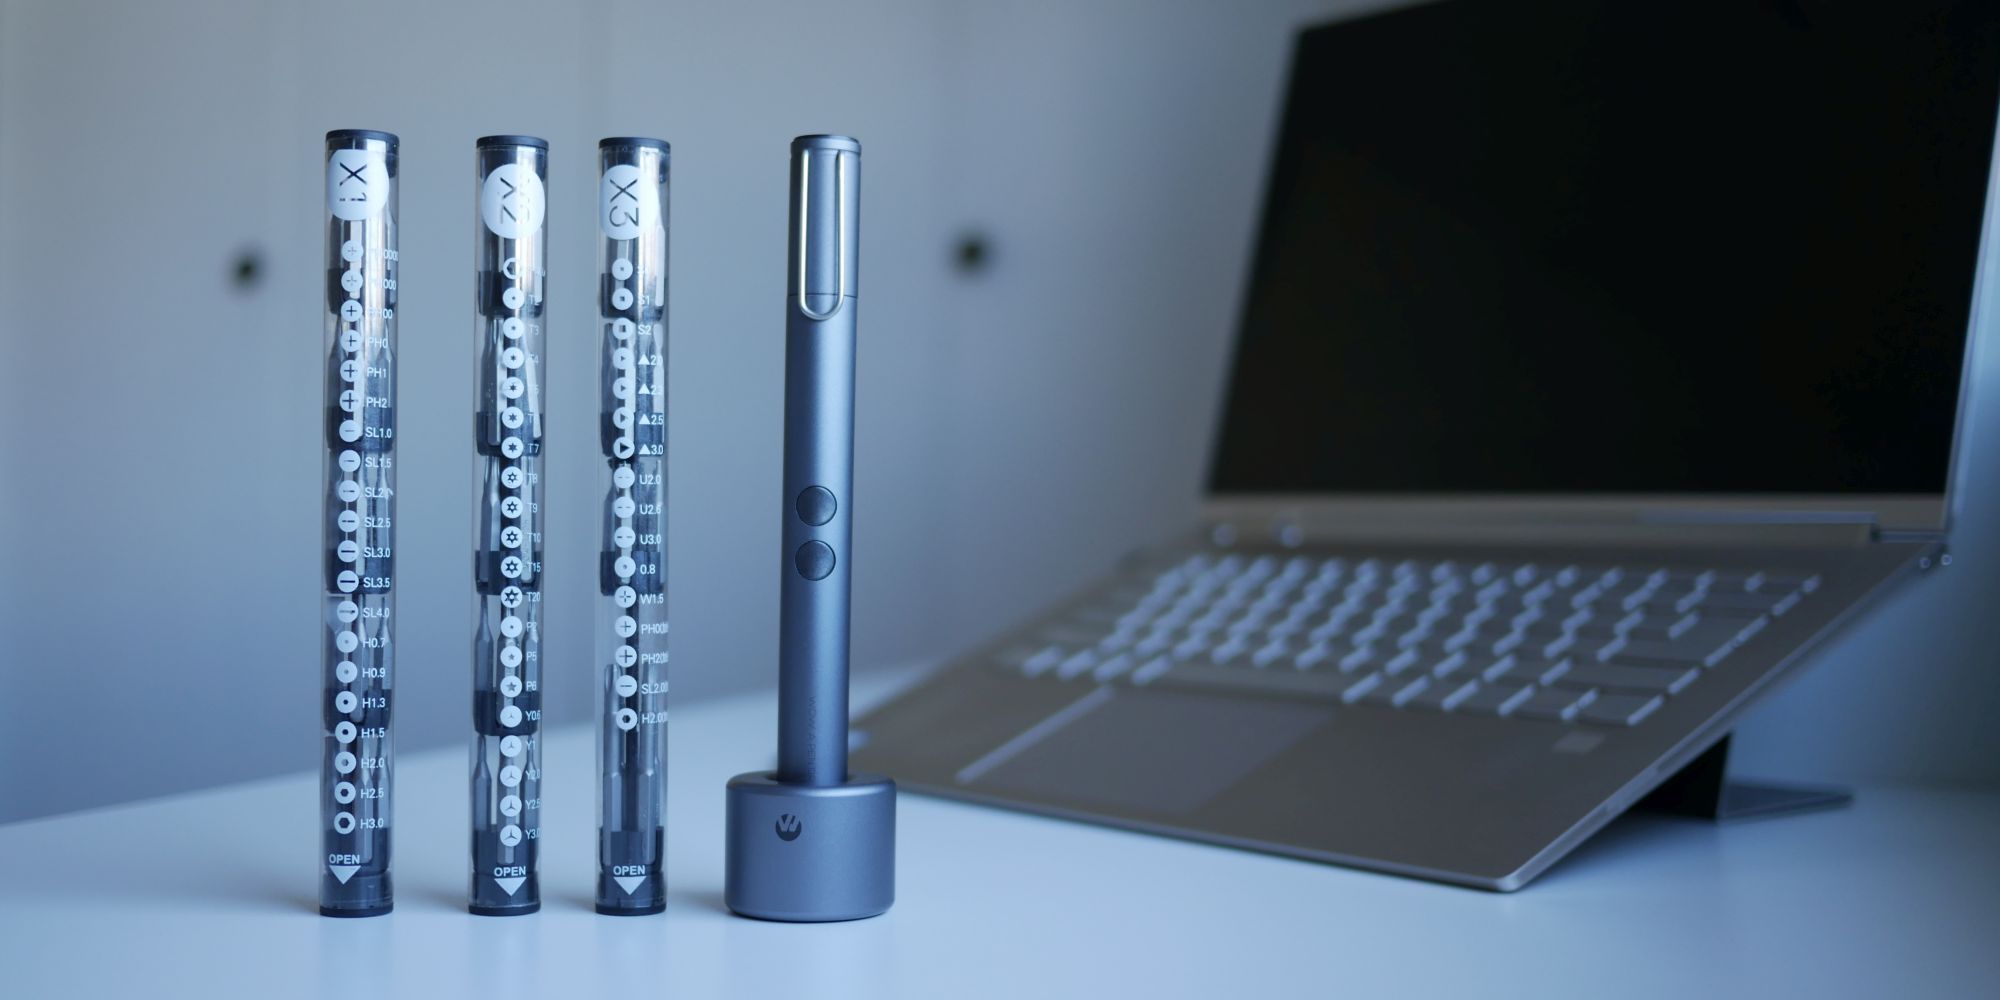 Wowstick and three sets of screw bits standing on a table with laptop in background.